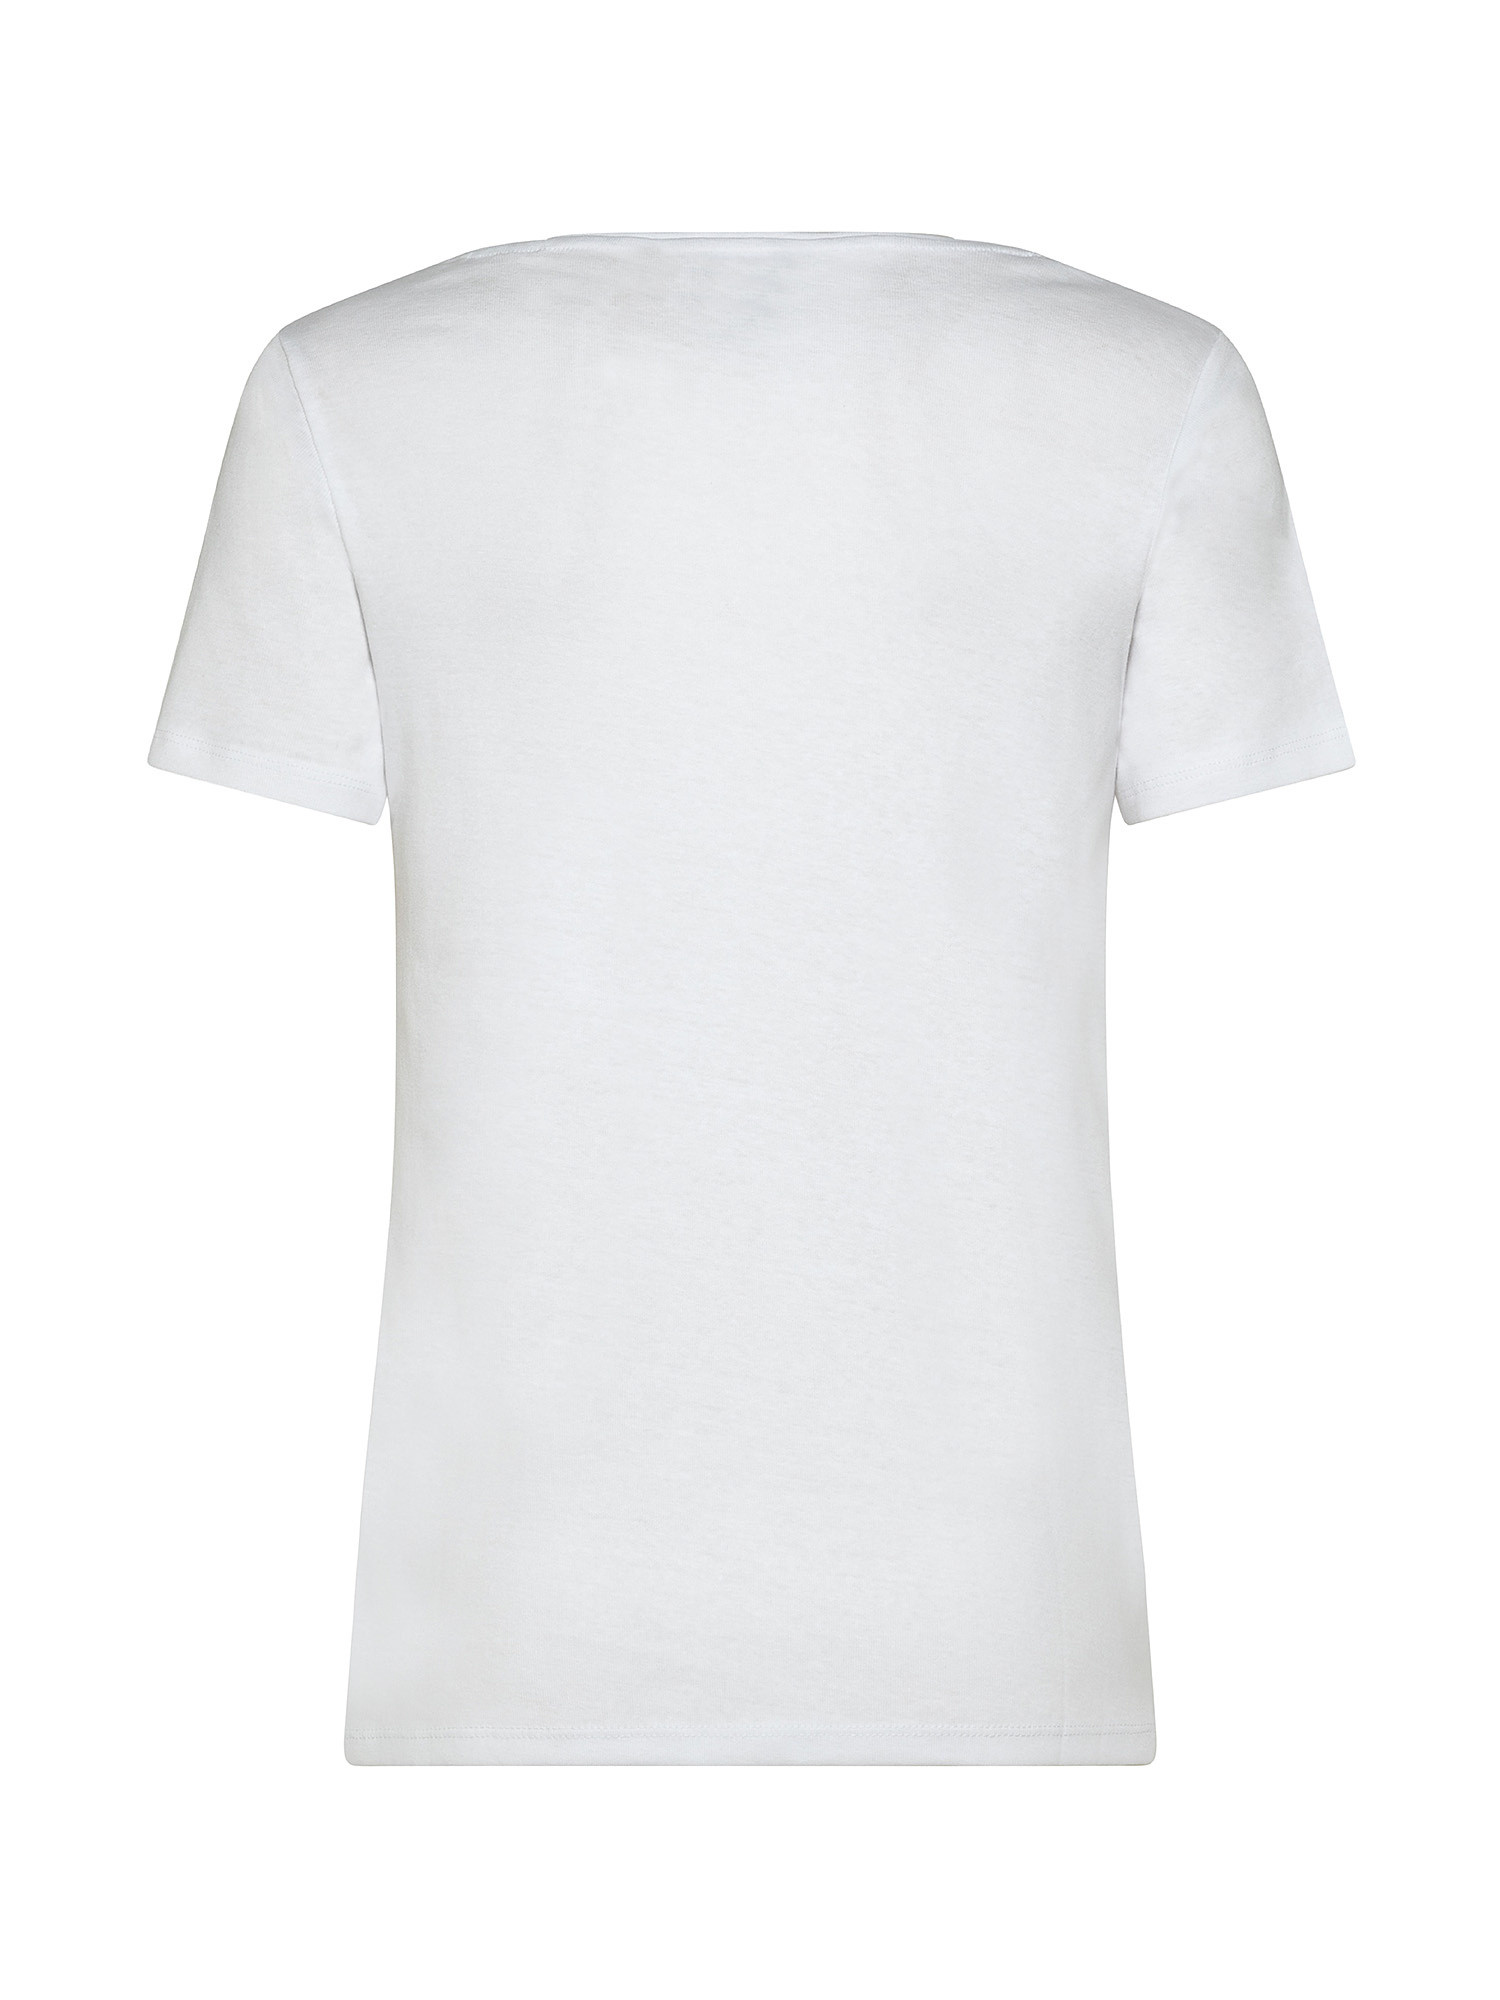 Classic polo shirt, White, large image number 1